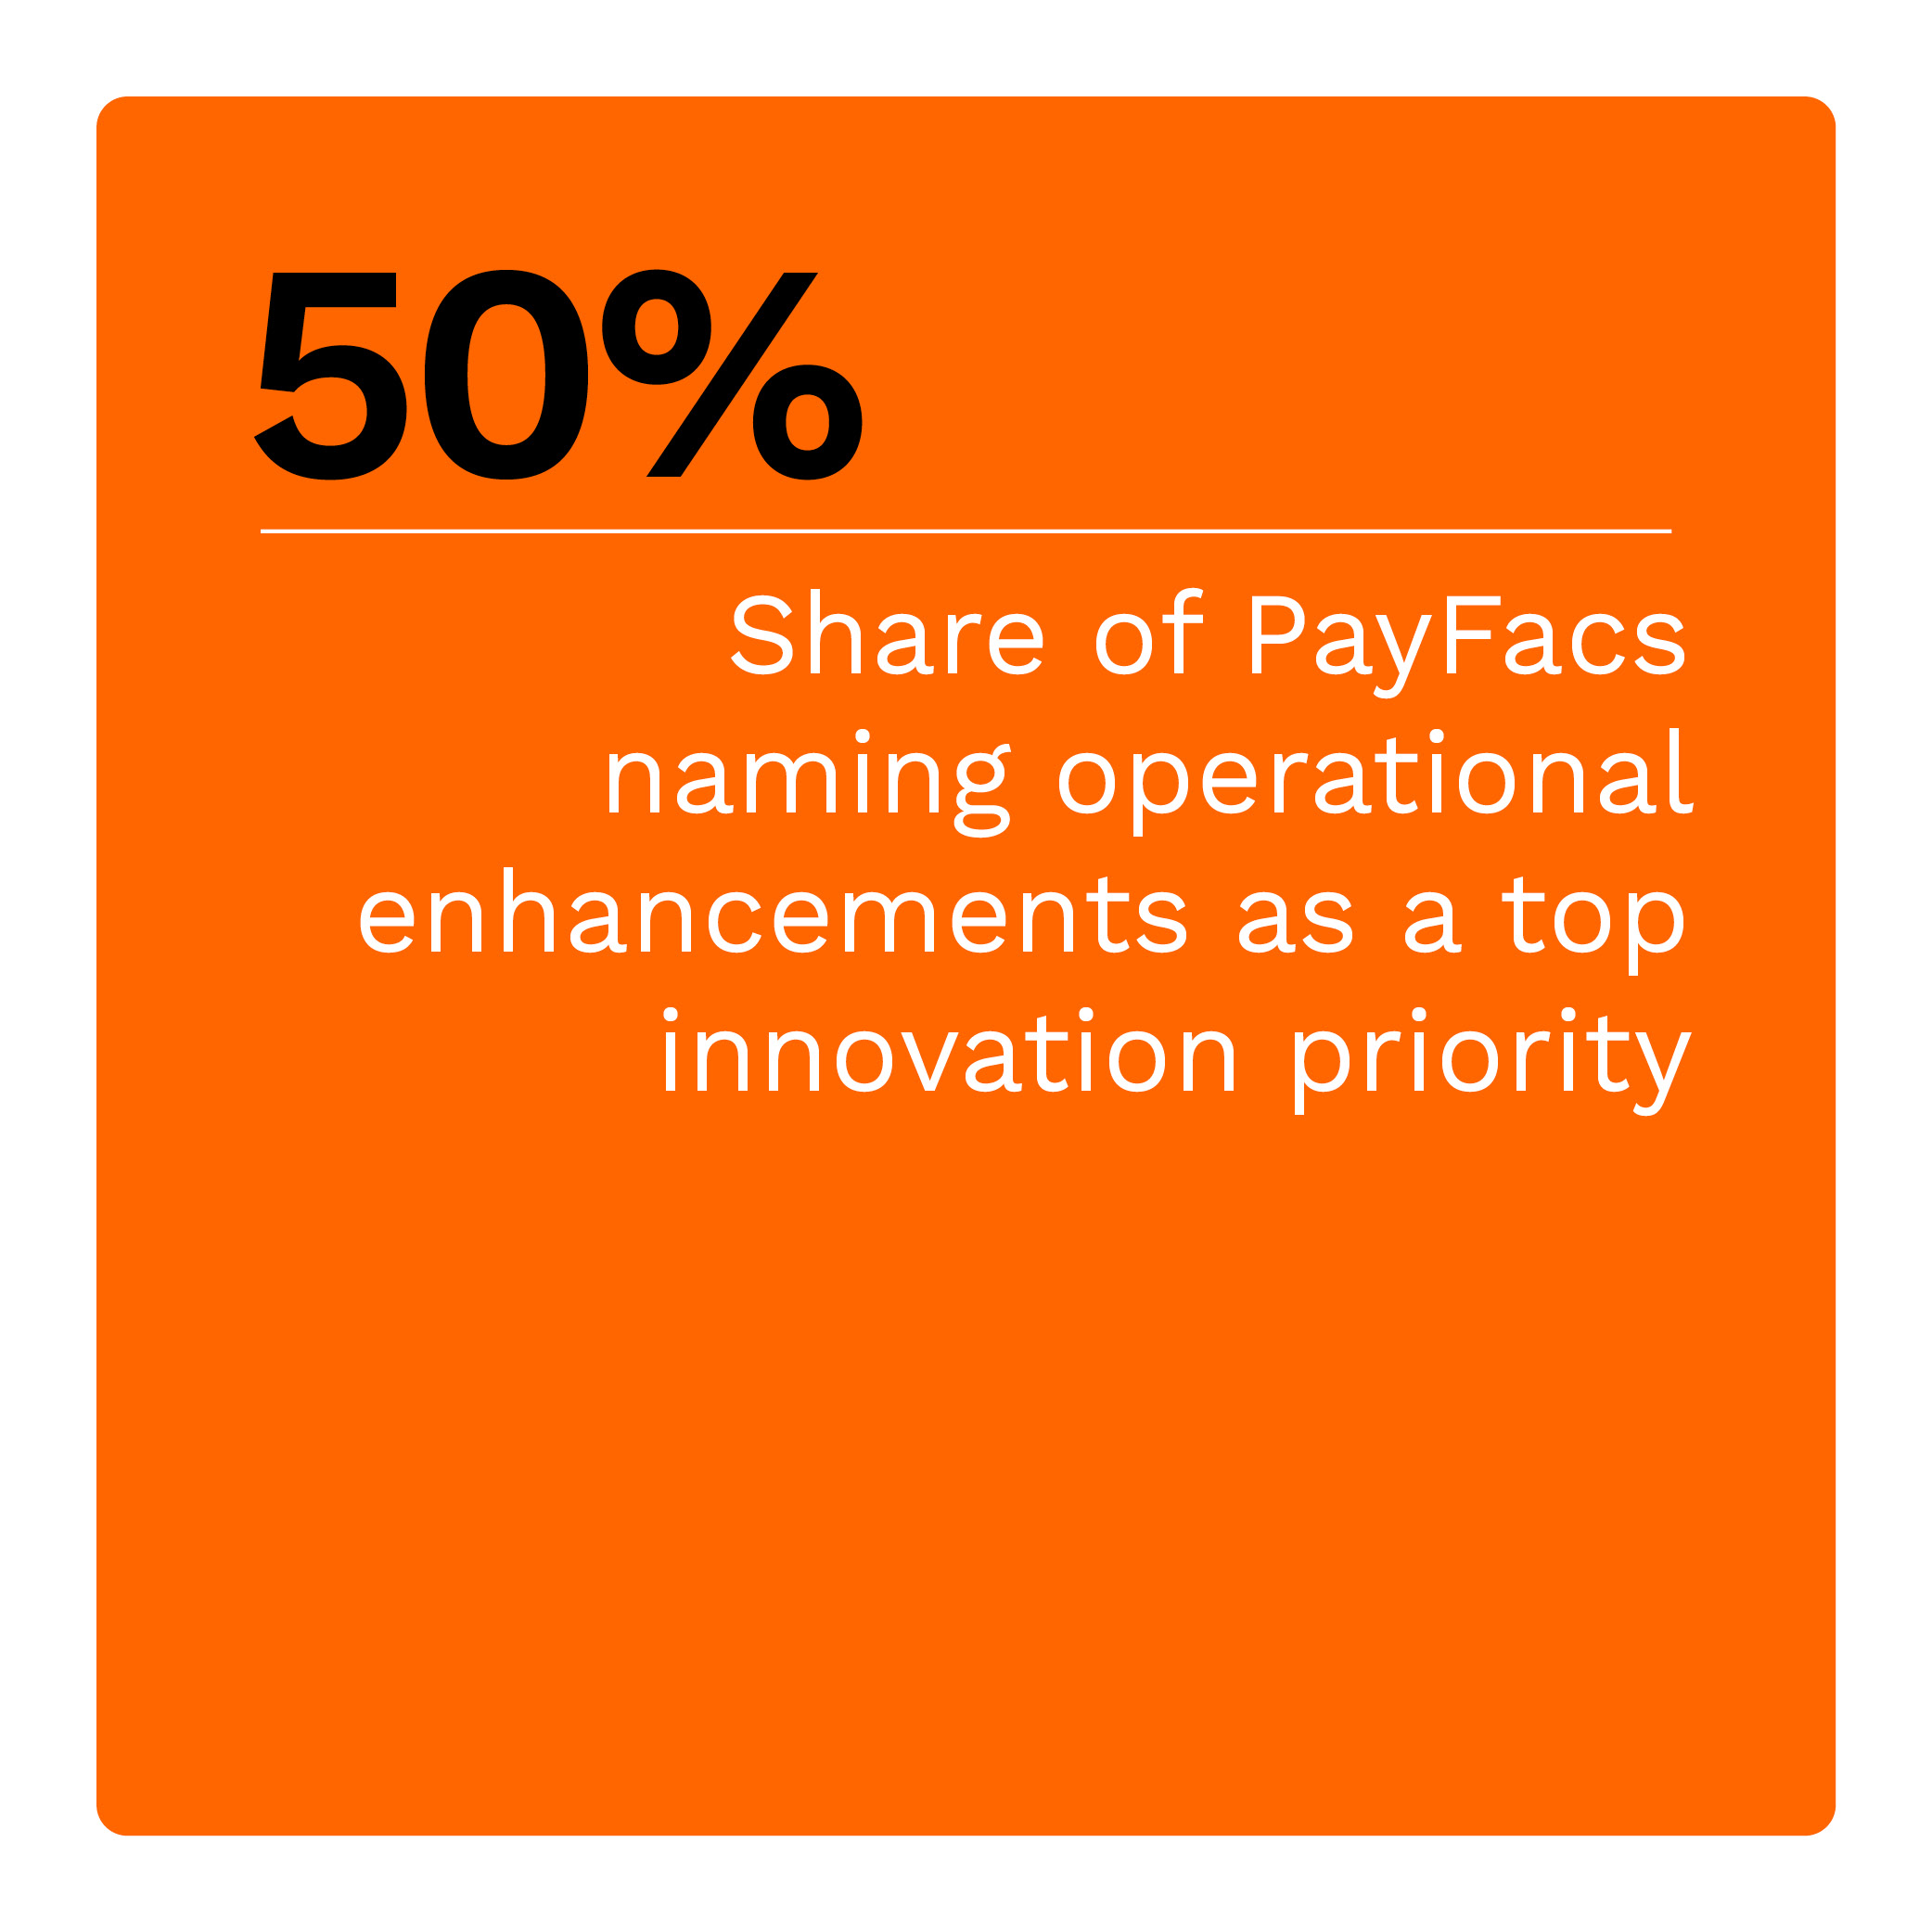 50%: Share of PayFacs naming operational enhancements as their top innovation priority